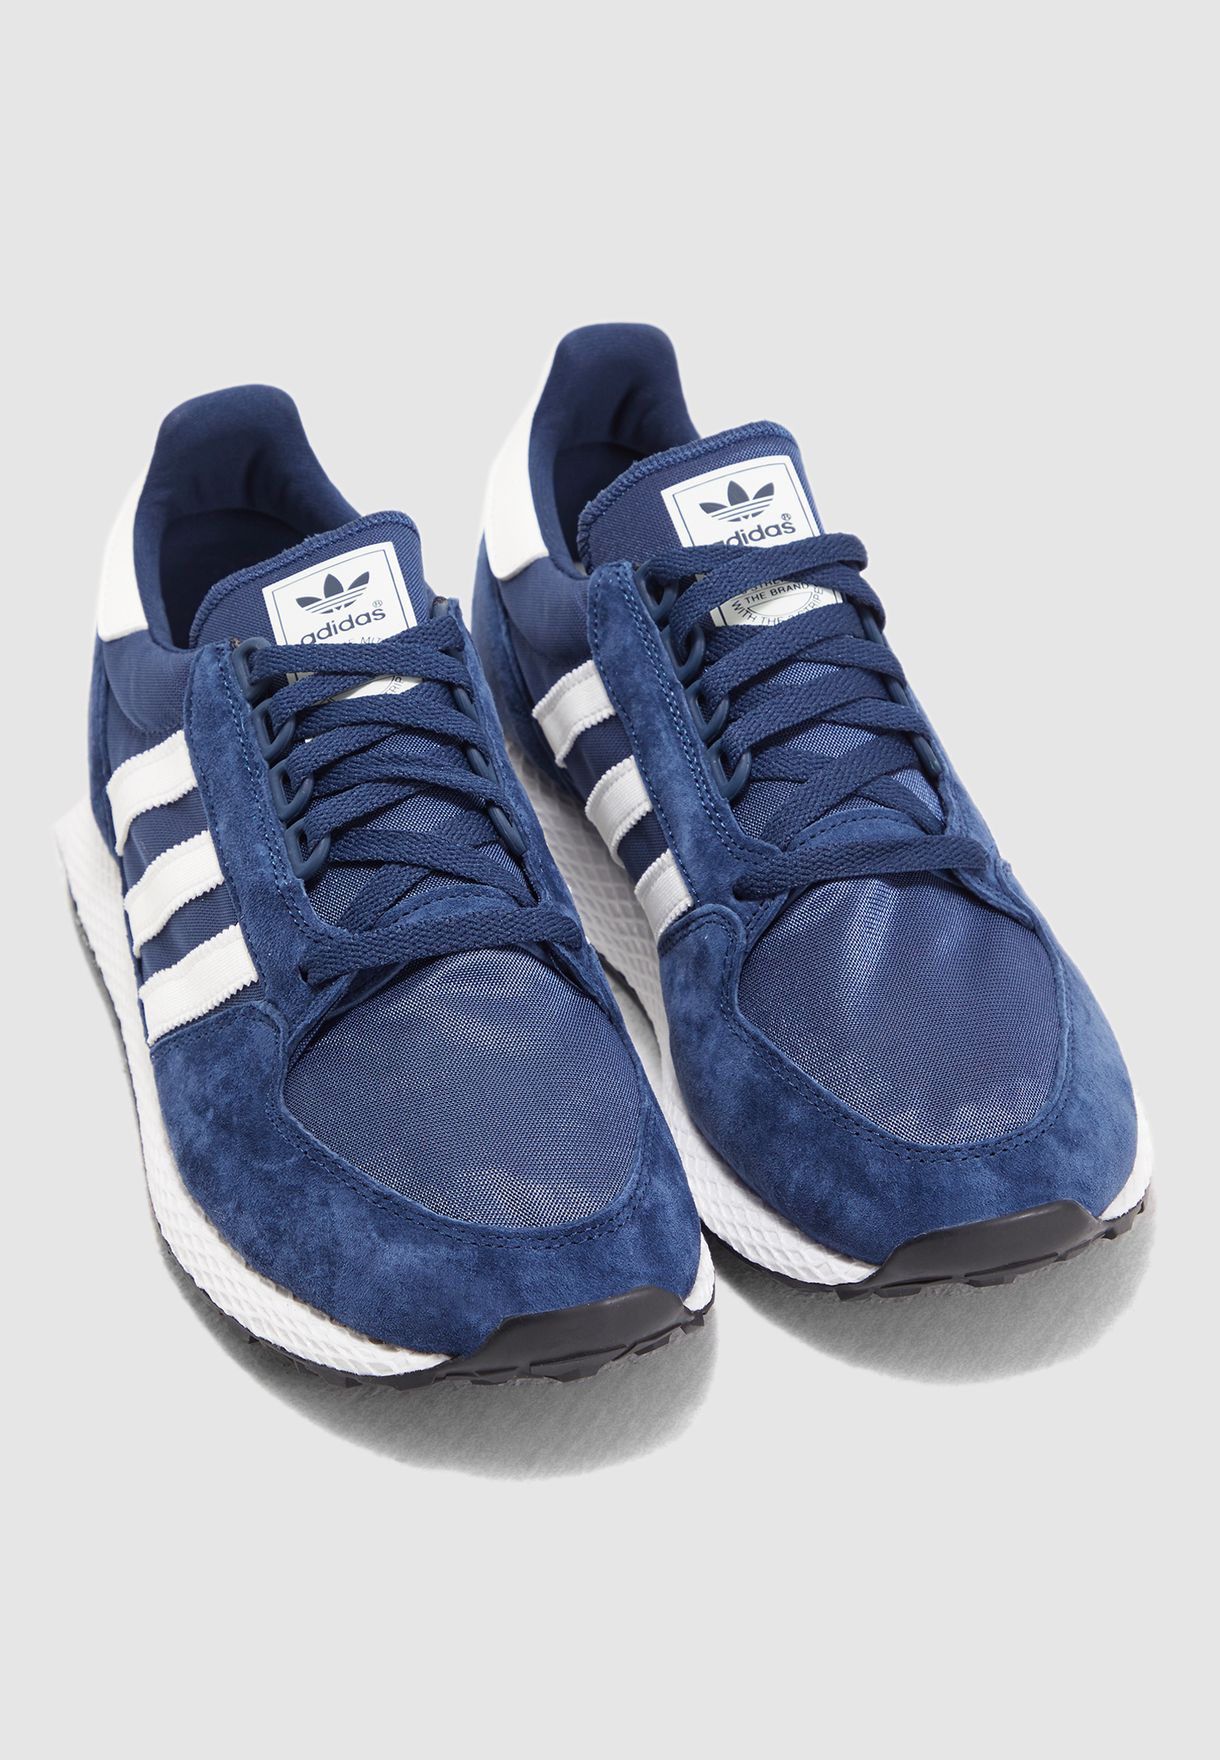 Adidas Forest Grove Outfit Best Sale, GET 60% OFF, 